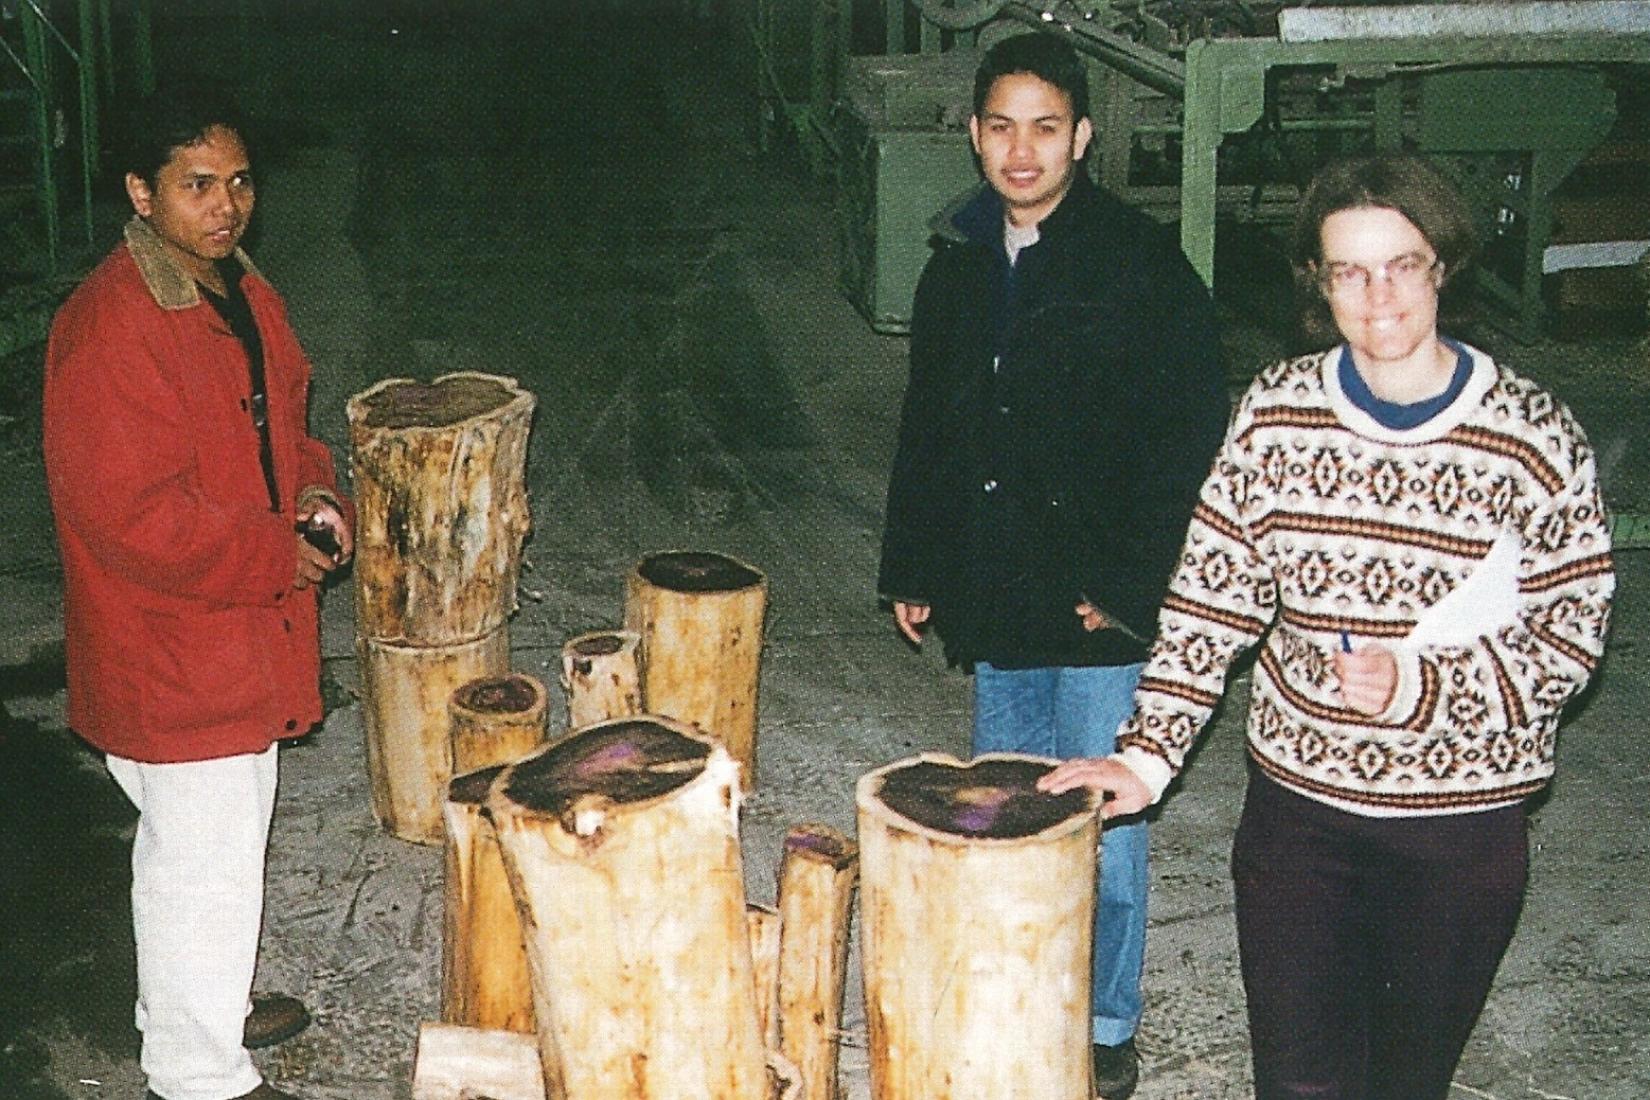 3 people standing next to timber samples